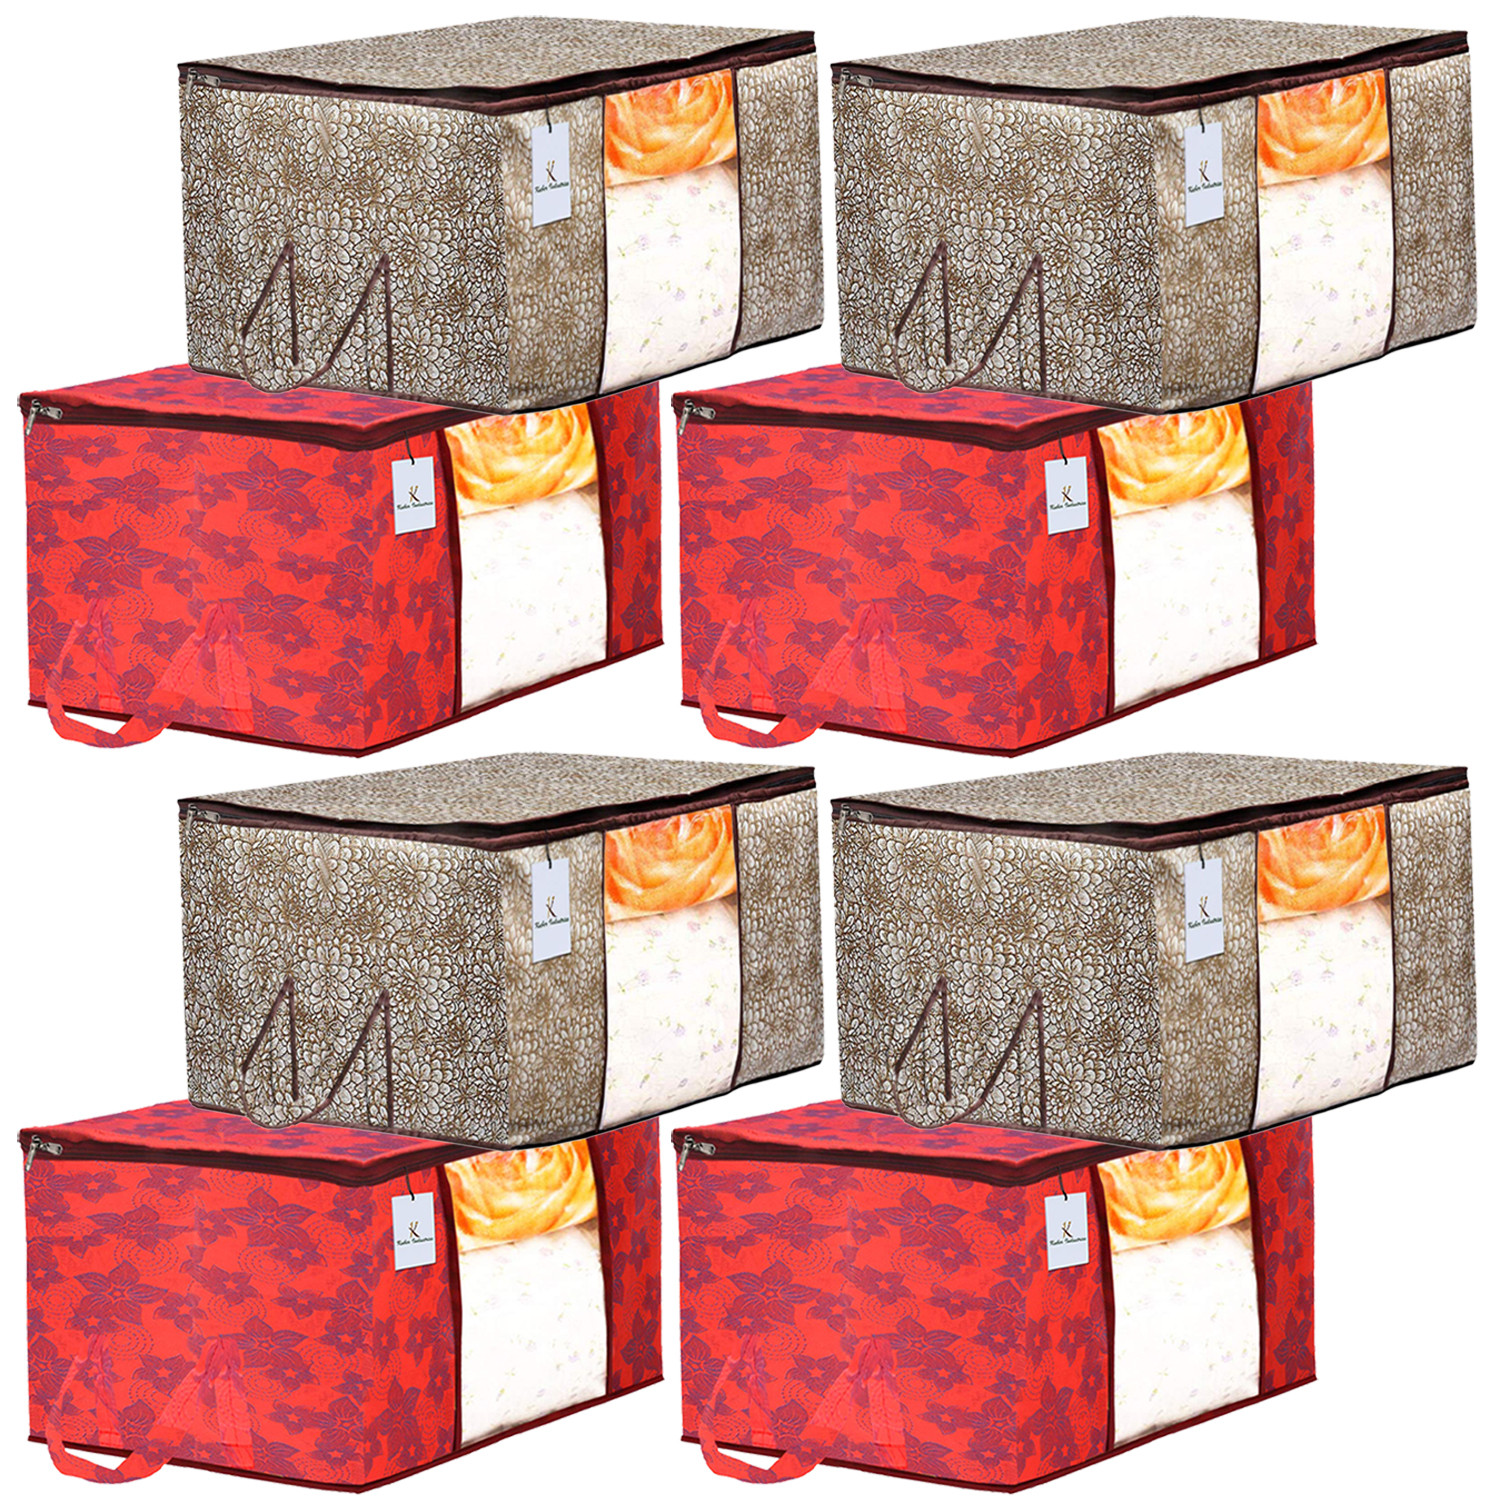 Kuber Industries Metalic Printed Non Woven Fabric Underbed Storage Bag,Cloth Organiser,Blanket Cover with Transparent Window, Golden Brown & Red -CTKTC41051